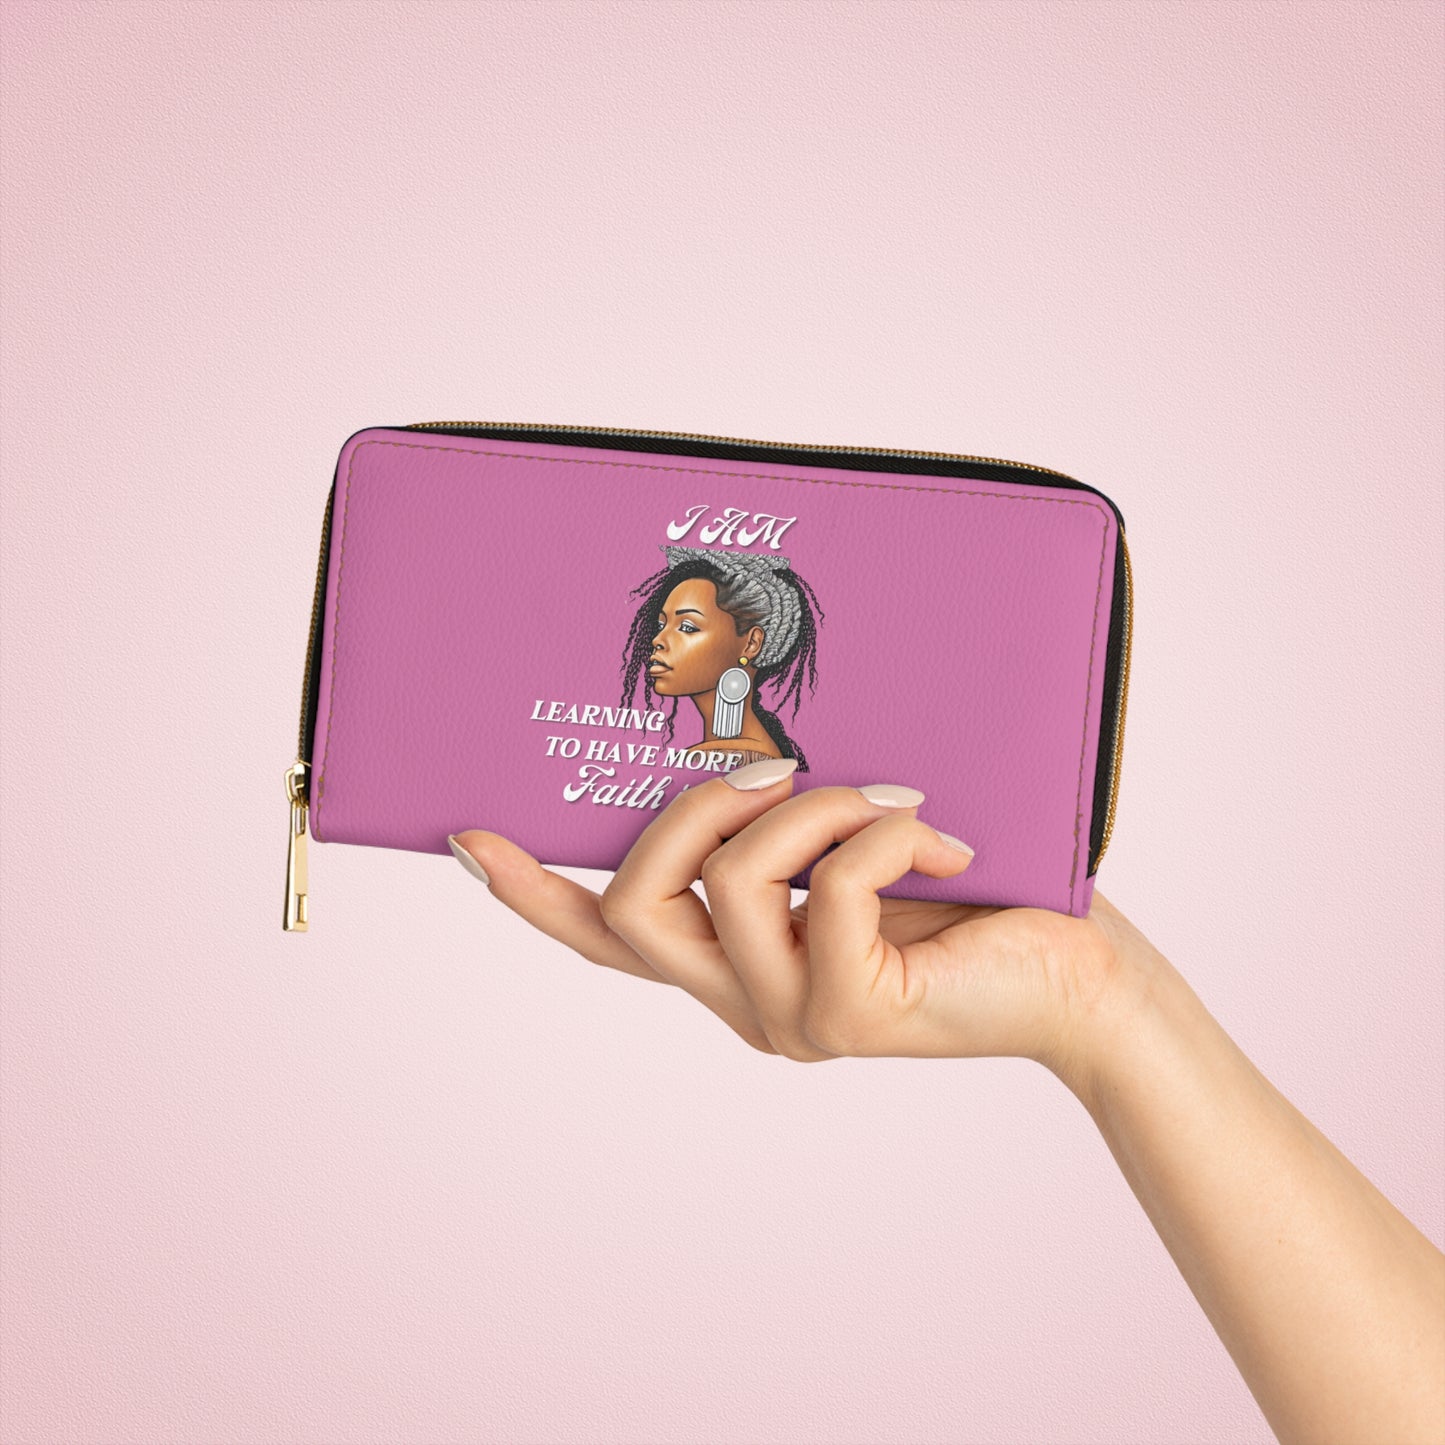 " Faith In Myself" -Positive Afrocentric Affirmation Vegan Leather Wallet Bag- Empower Your Style and Self-Love; Pink Wallet